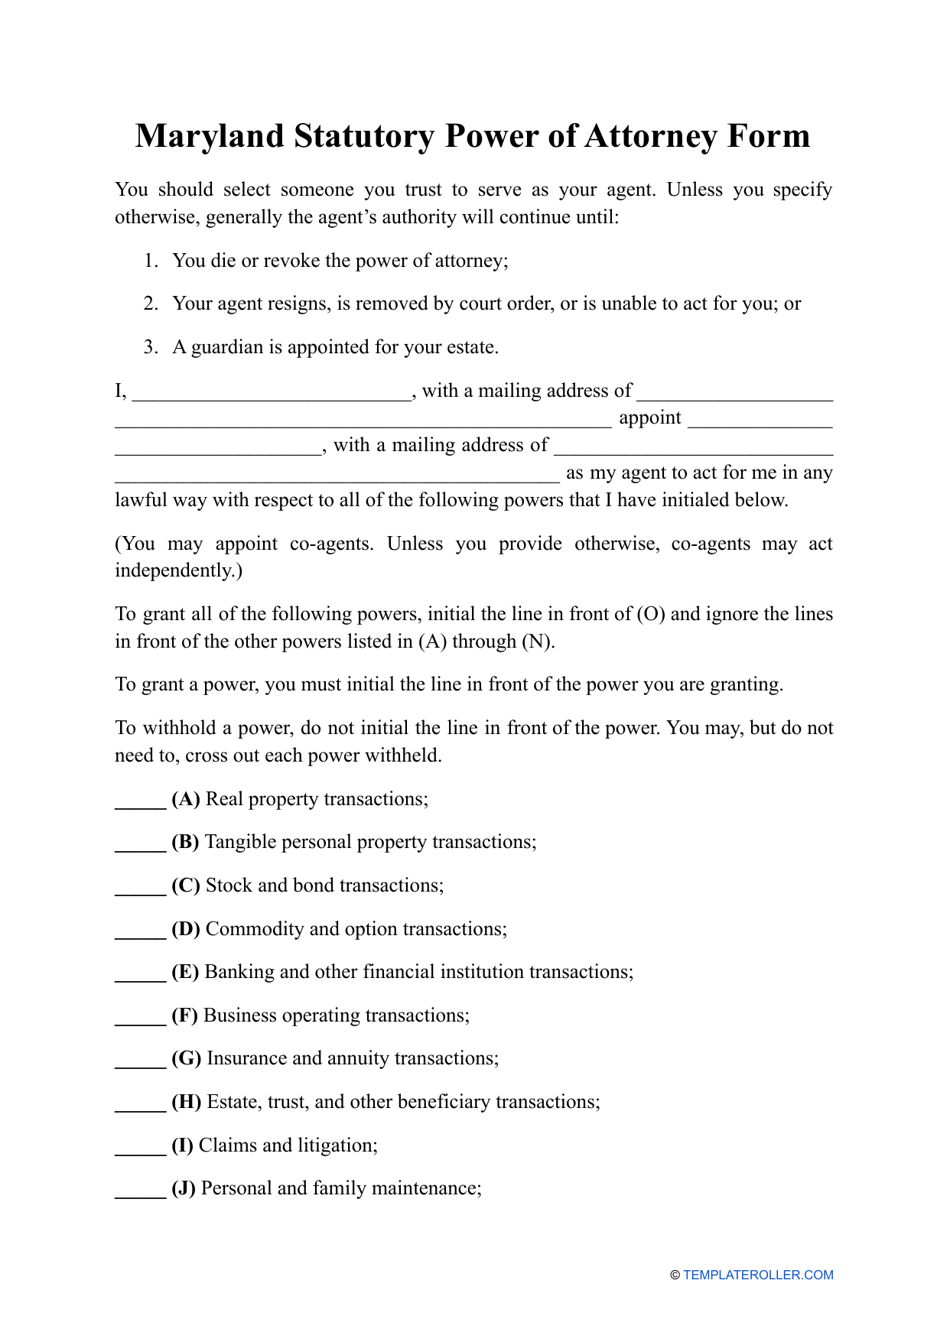 Statutory Power of Attorney Form - Maryland, Page 1